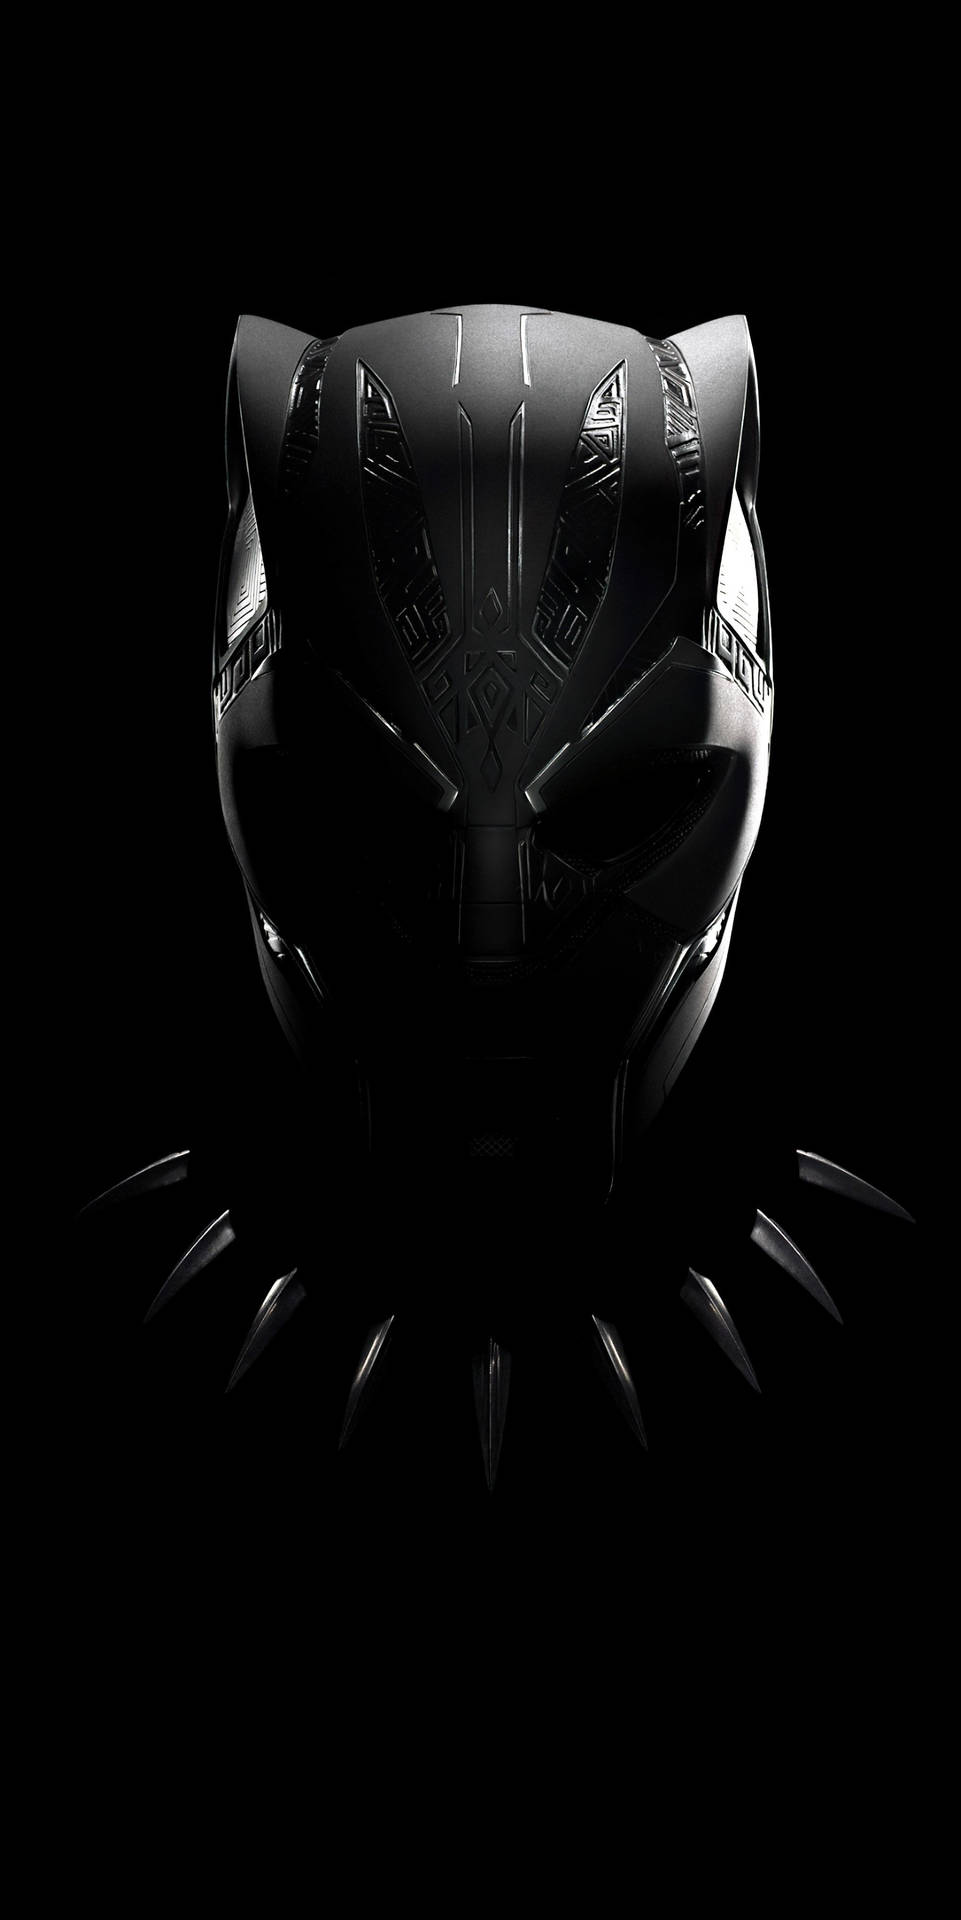 Sleek Suit Black Panther Android